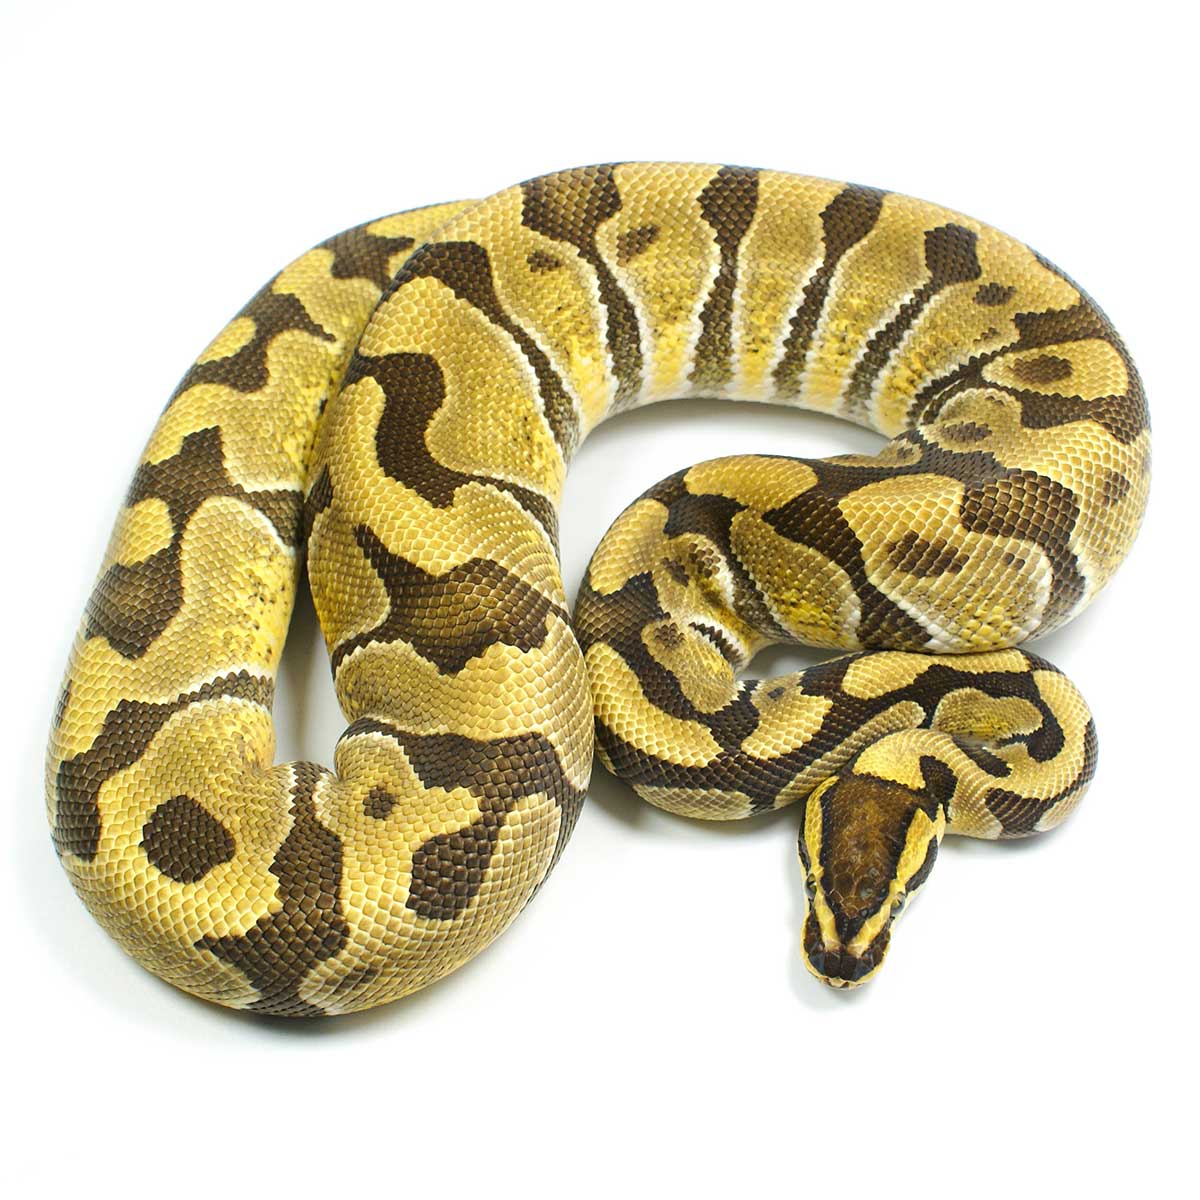 Enchi Het Clown Ball Python | Male Hatched 2018 And Weighing 830 grams | Fe...